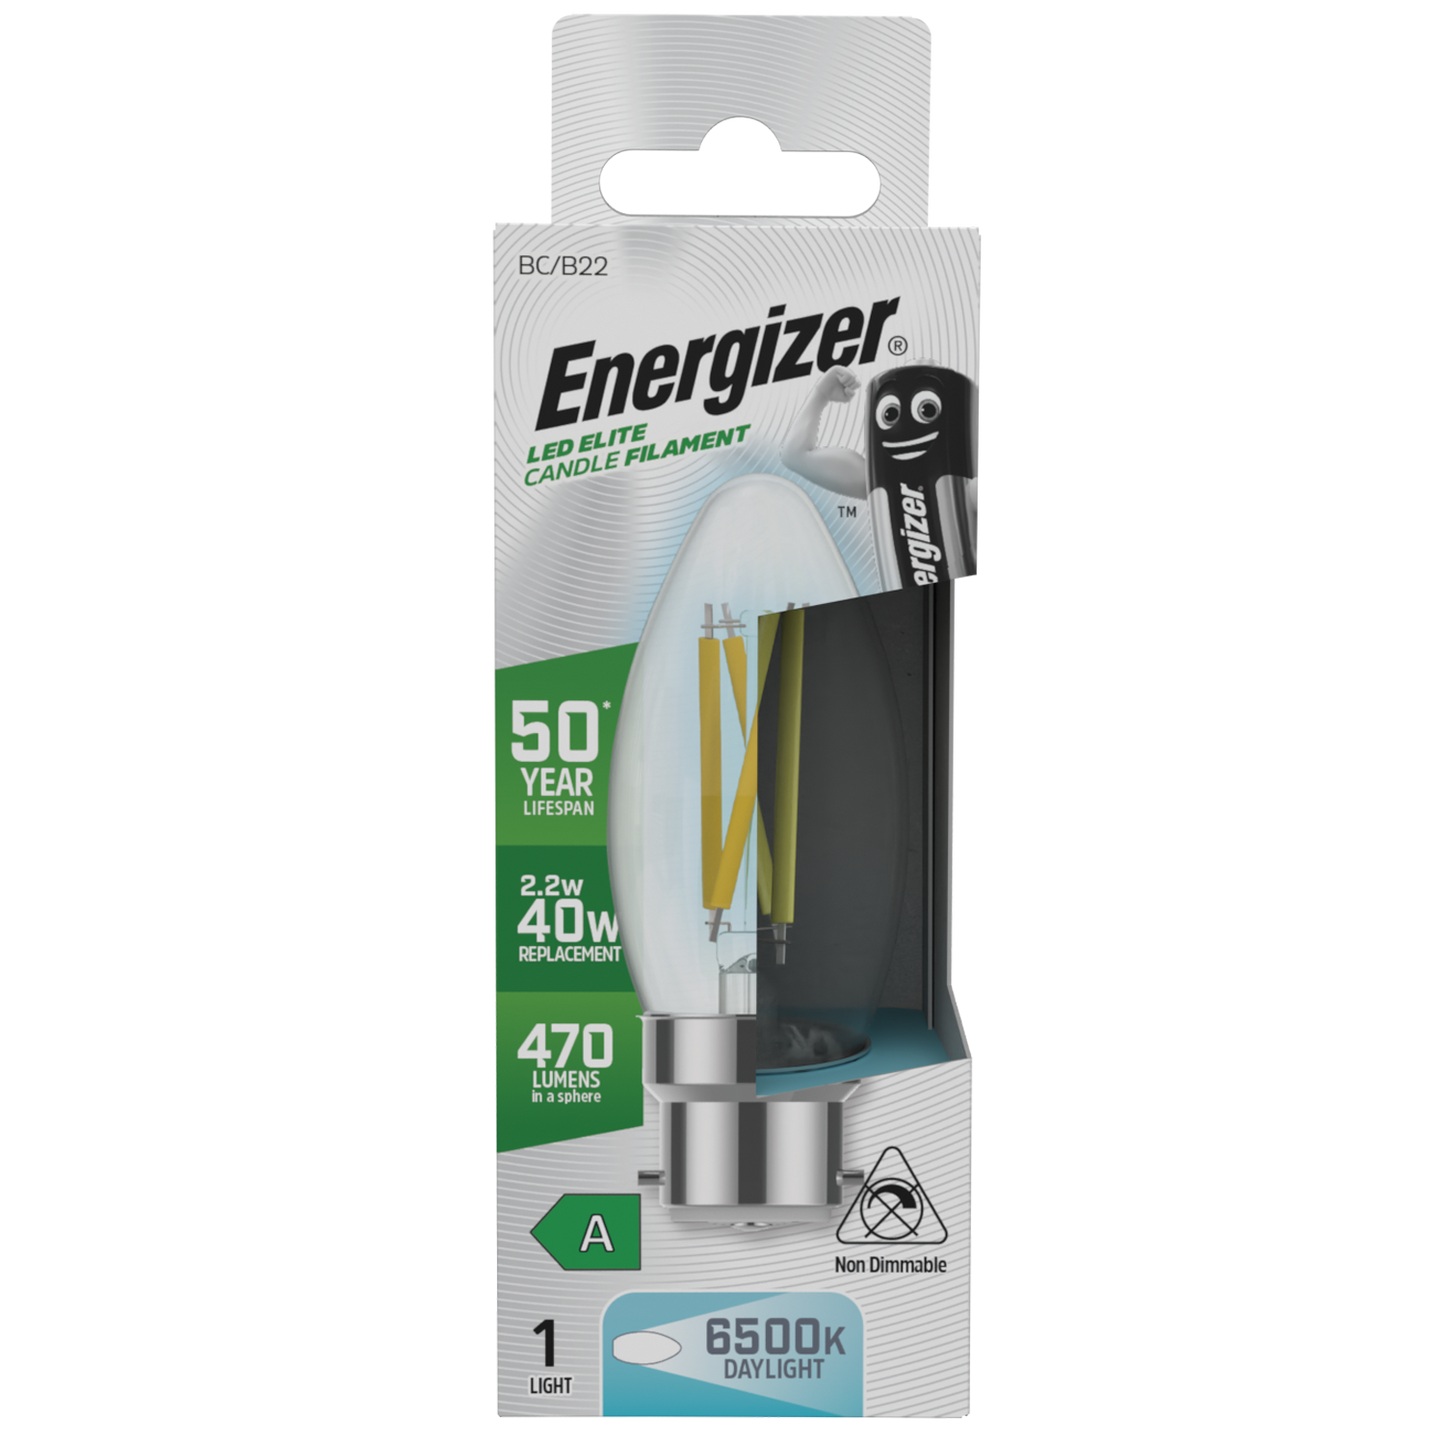 S29639 Energizer A Rated LED Elite Candle B22 Filament 470lm 2.2W 6500K (Daylight) - Box of 1